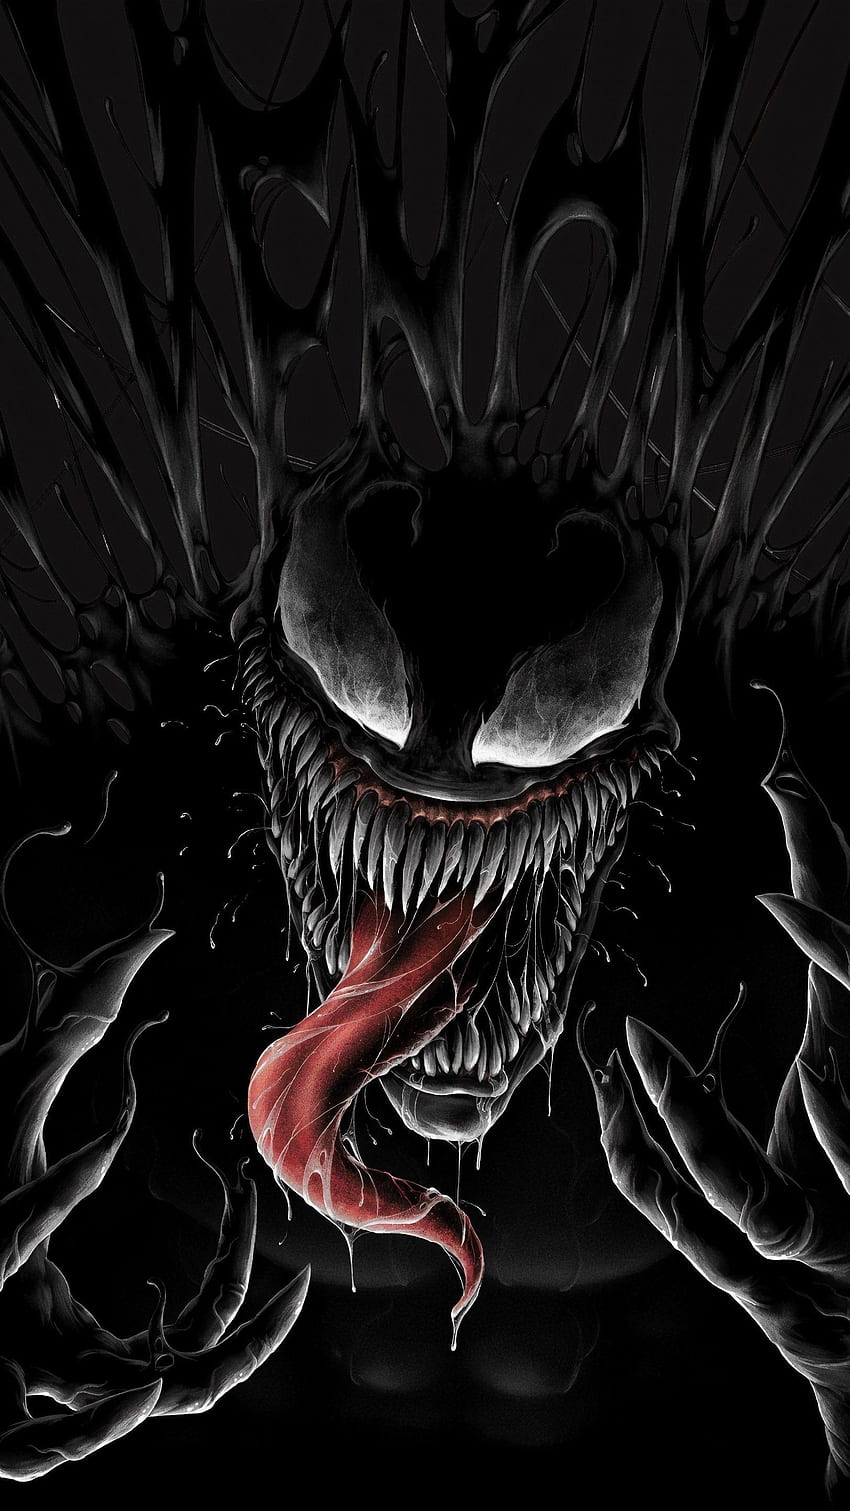 Venom Wallpaper Collection Available In 4K Resolution.